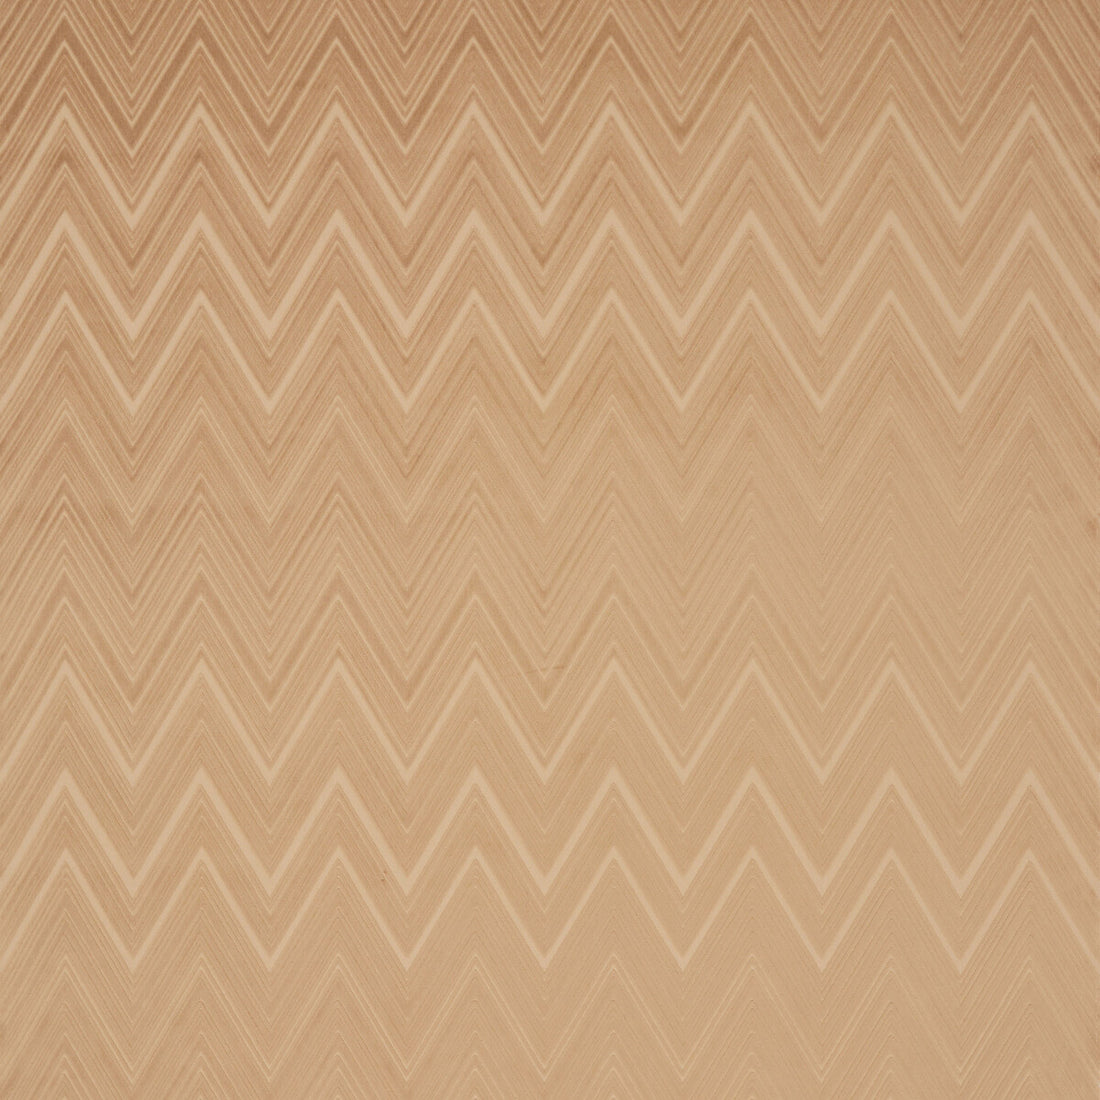 Basel fabric in 48 color - pattern 36704.16.0 - by Kravet Couture in the Missoni Home collection